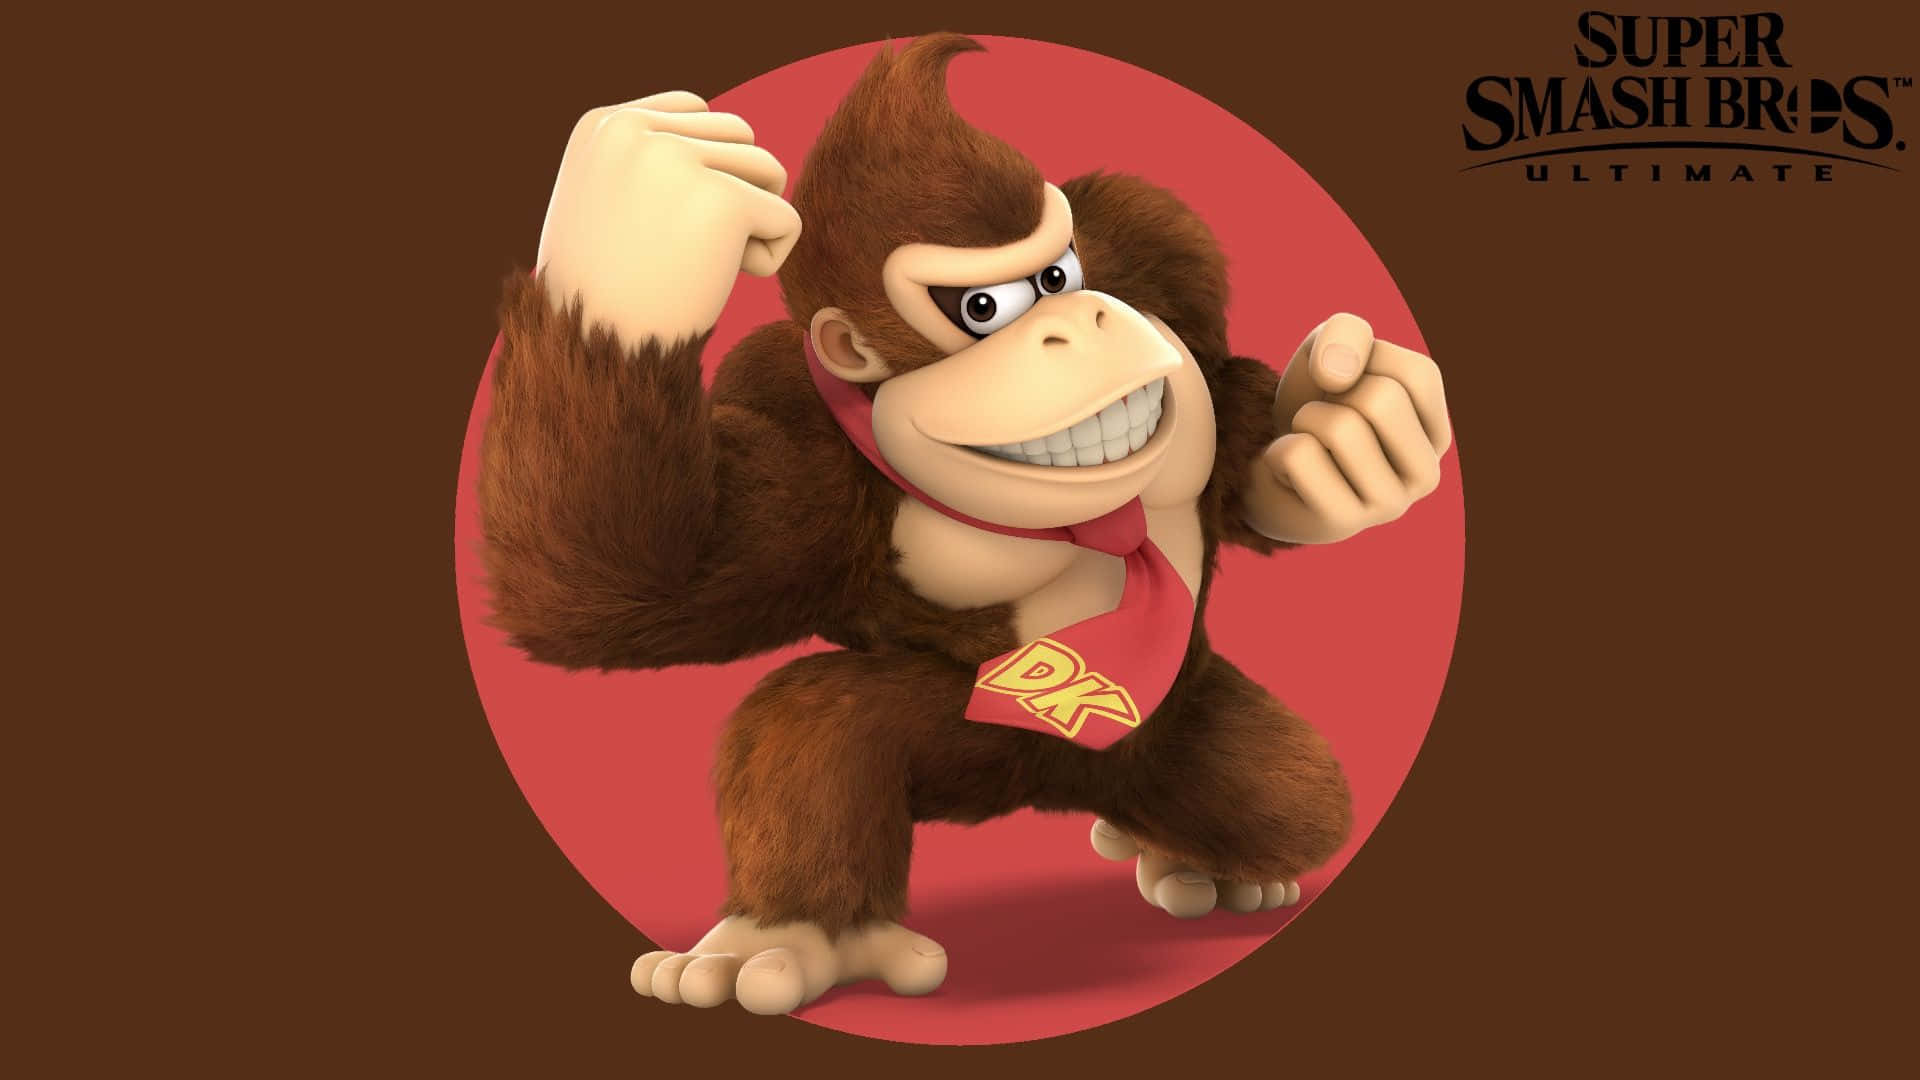 Donkey Kong In Action On An Exciting Adventure